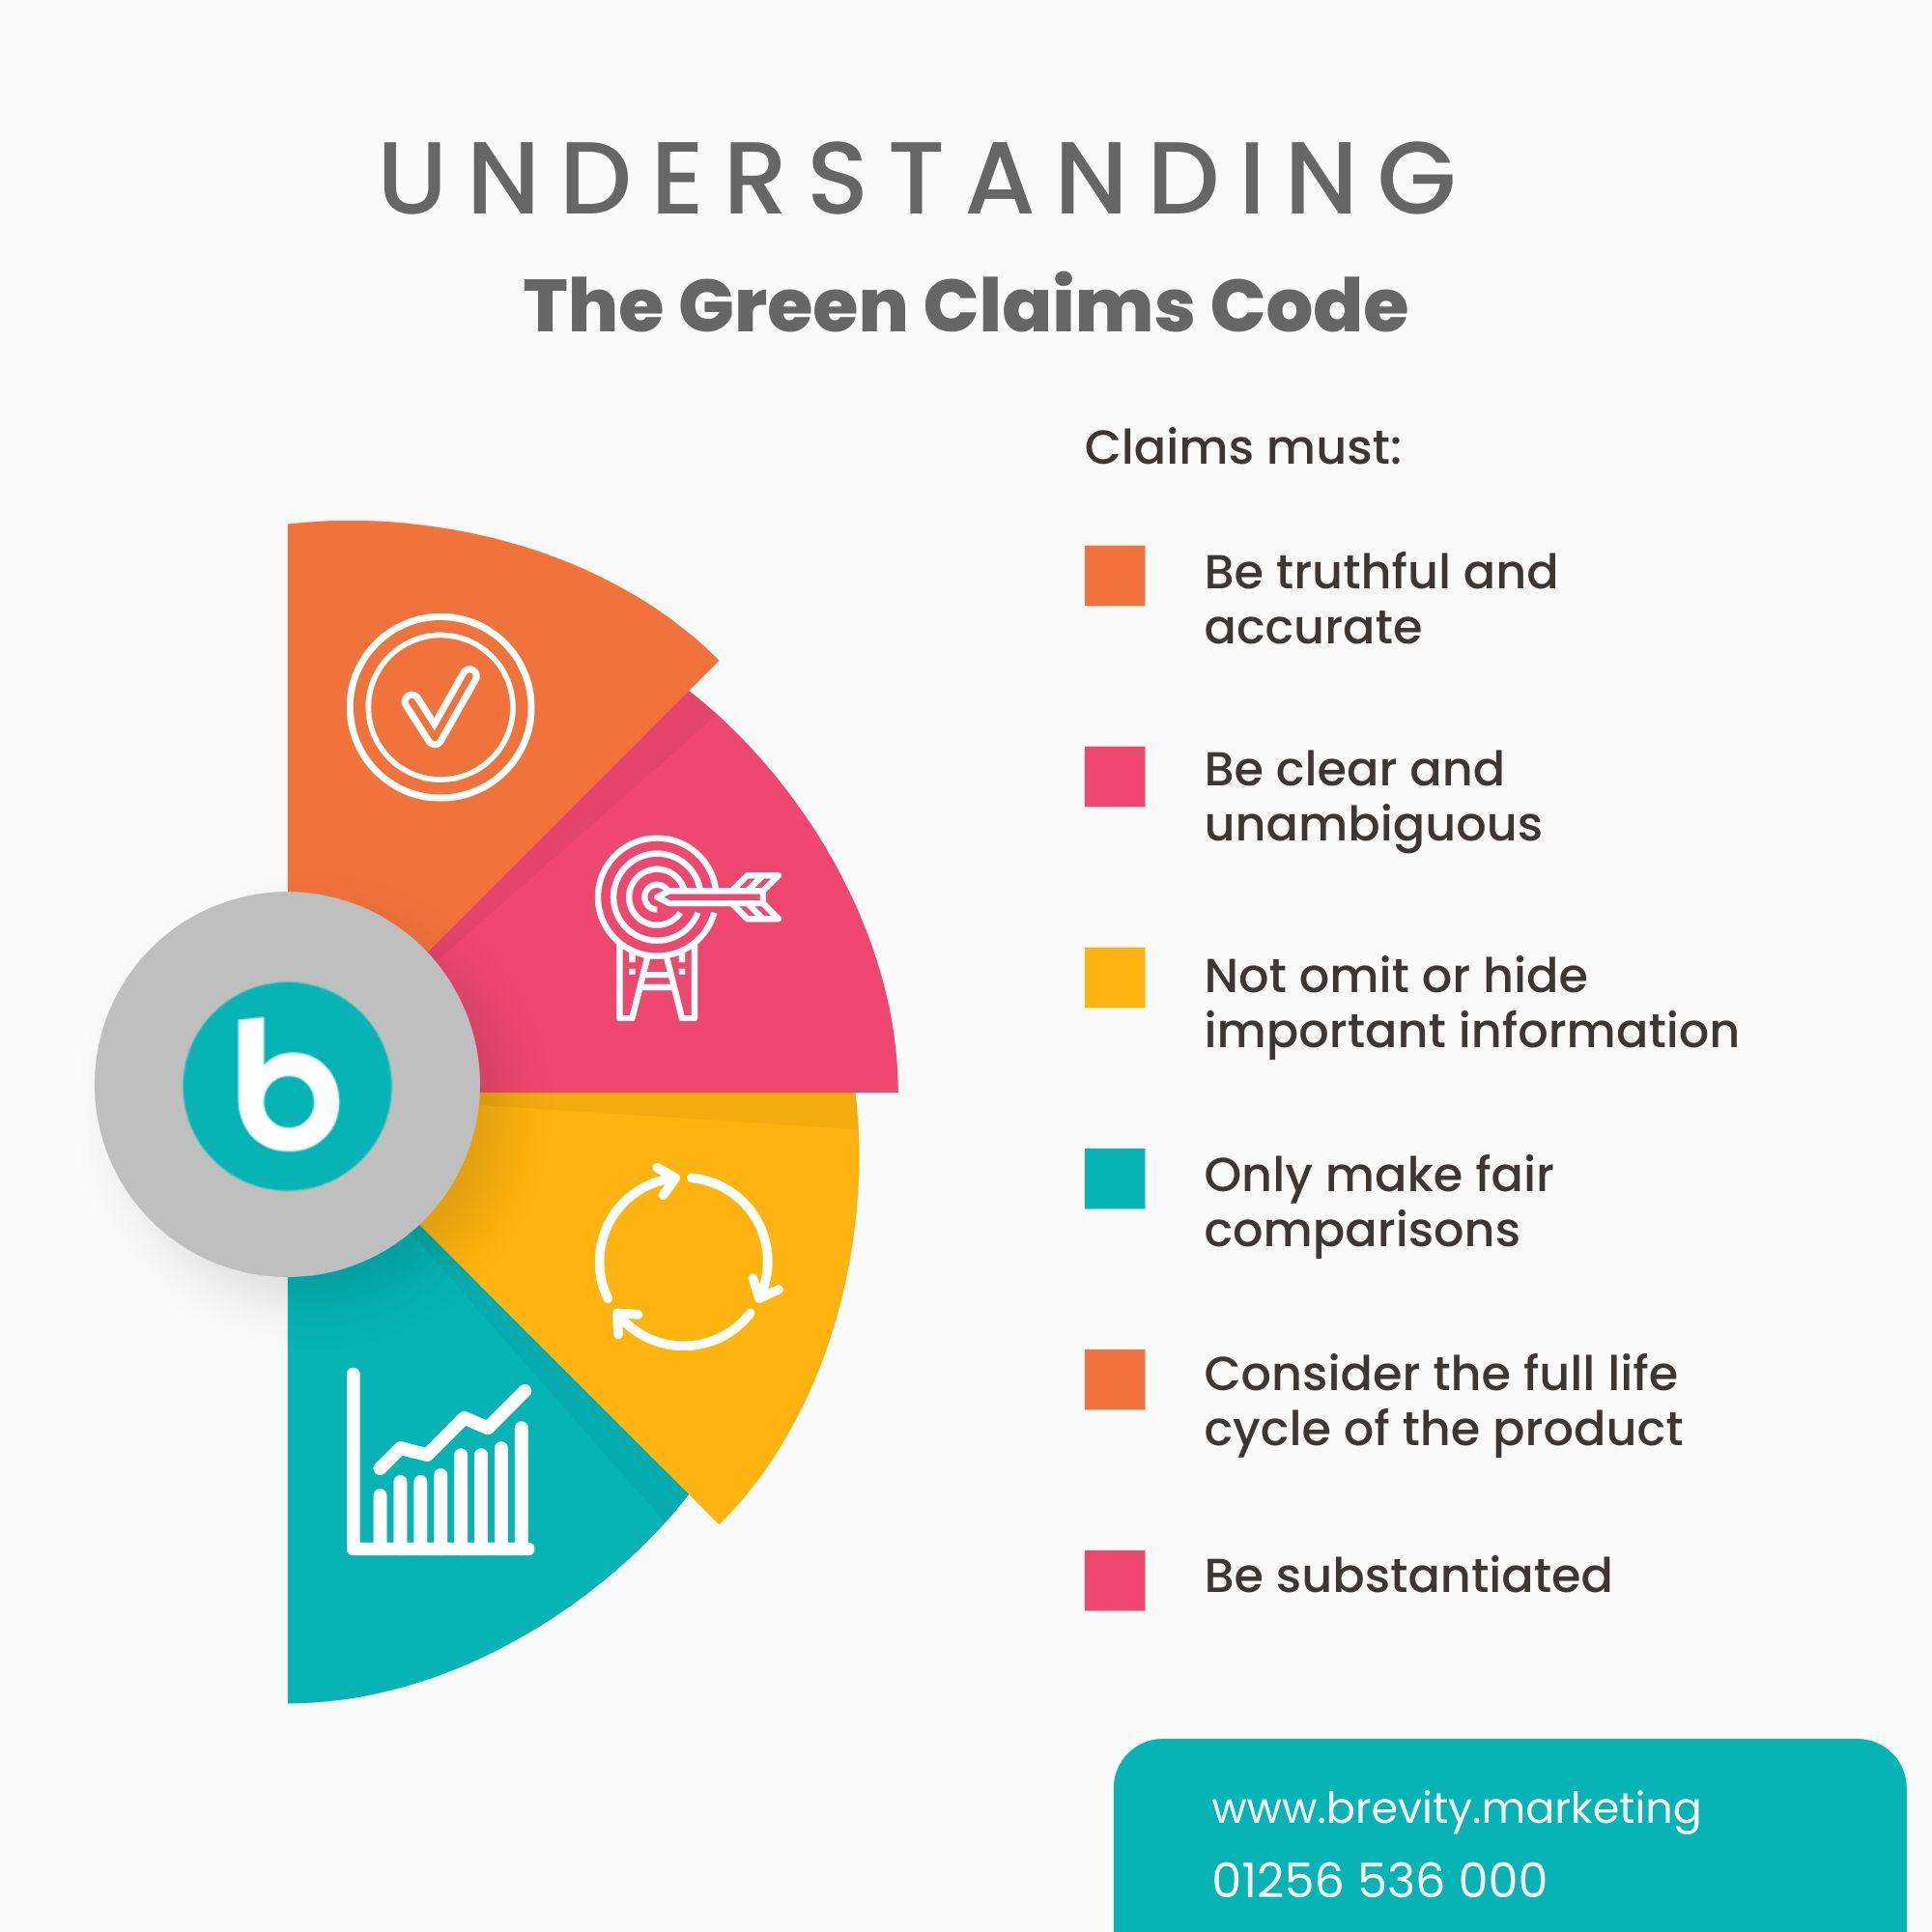 Green claims code